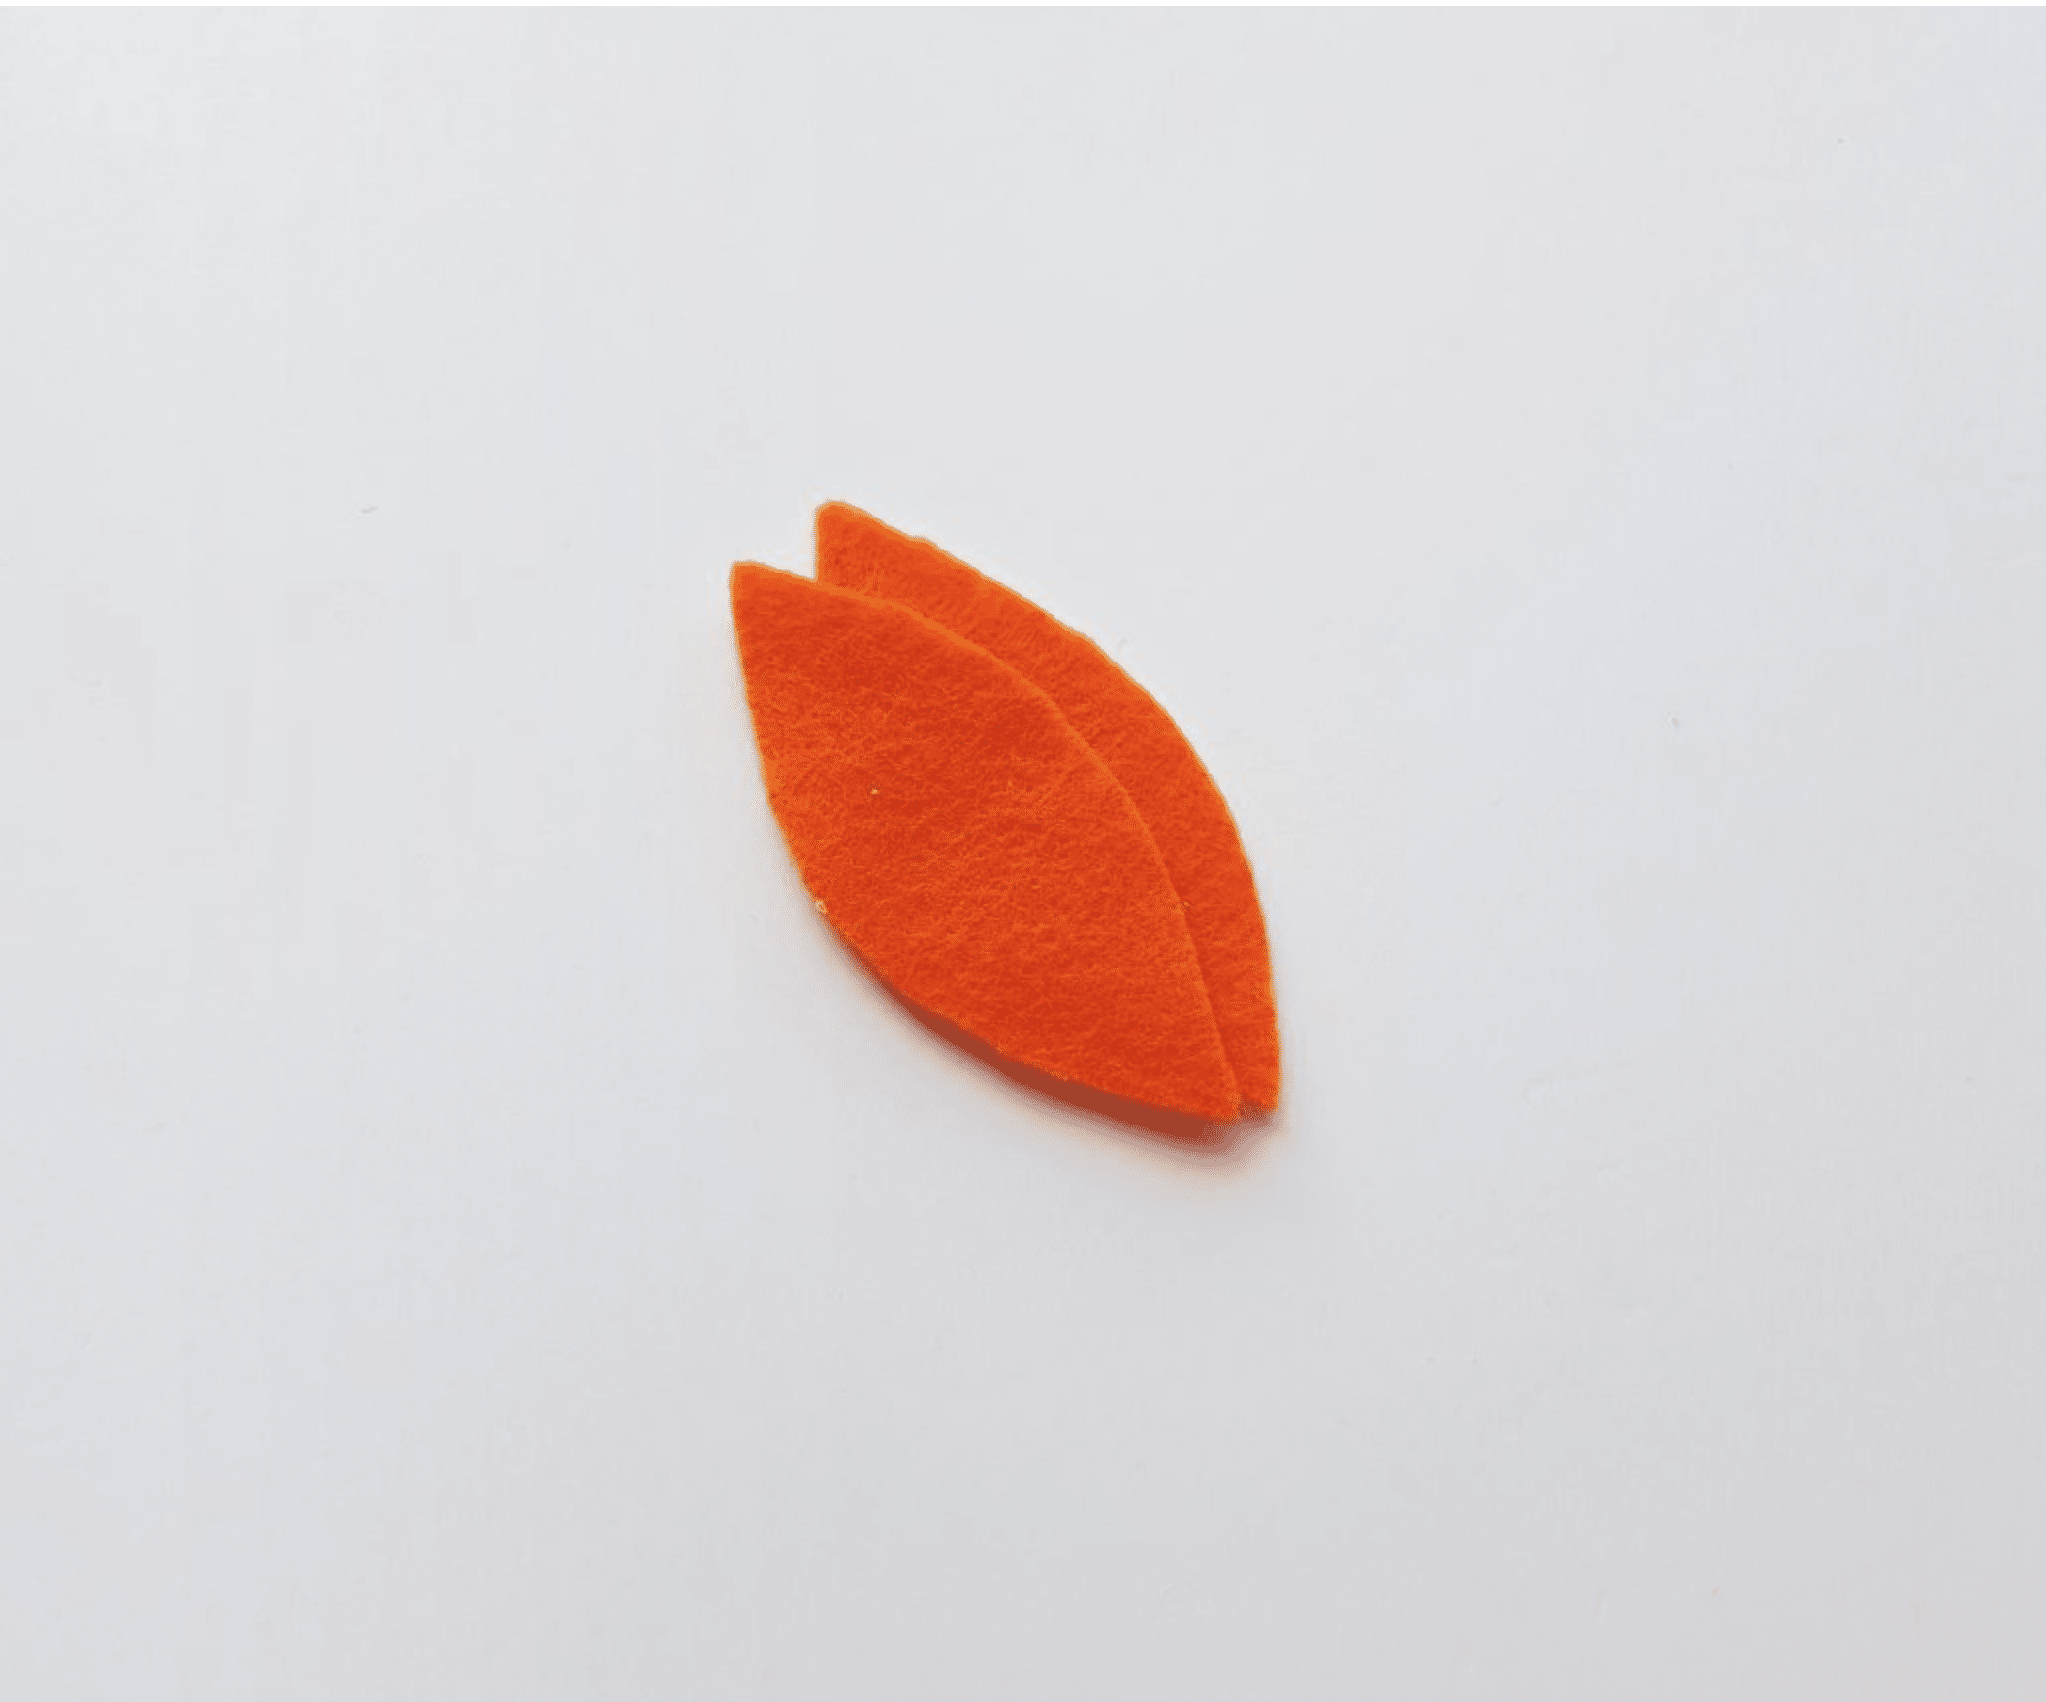 Two small orange felt cutouts shaped like leaves are placed on a plain white surface, perfect for adding a festive touch to your turkey craft project.